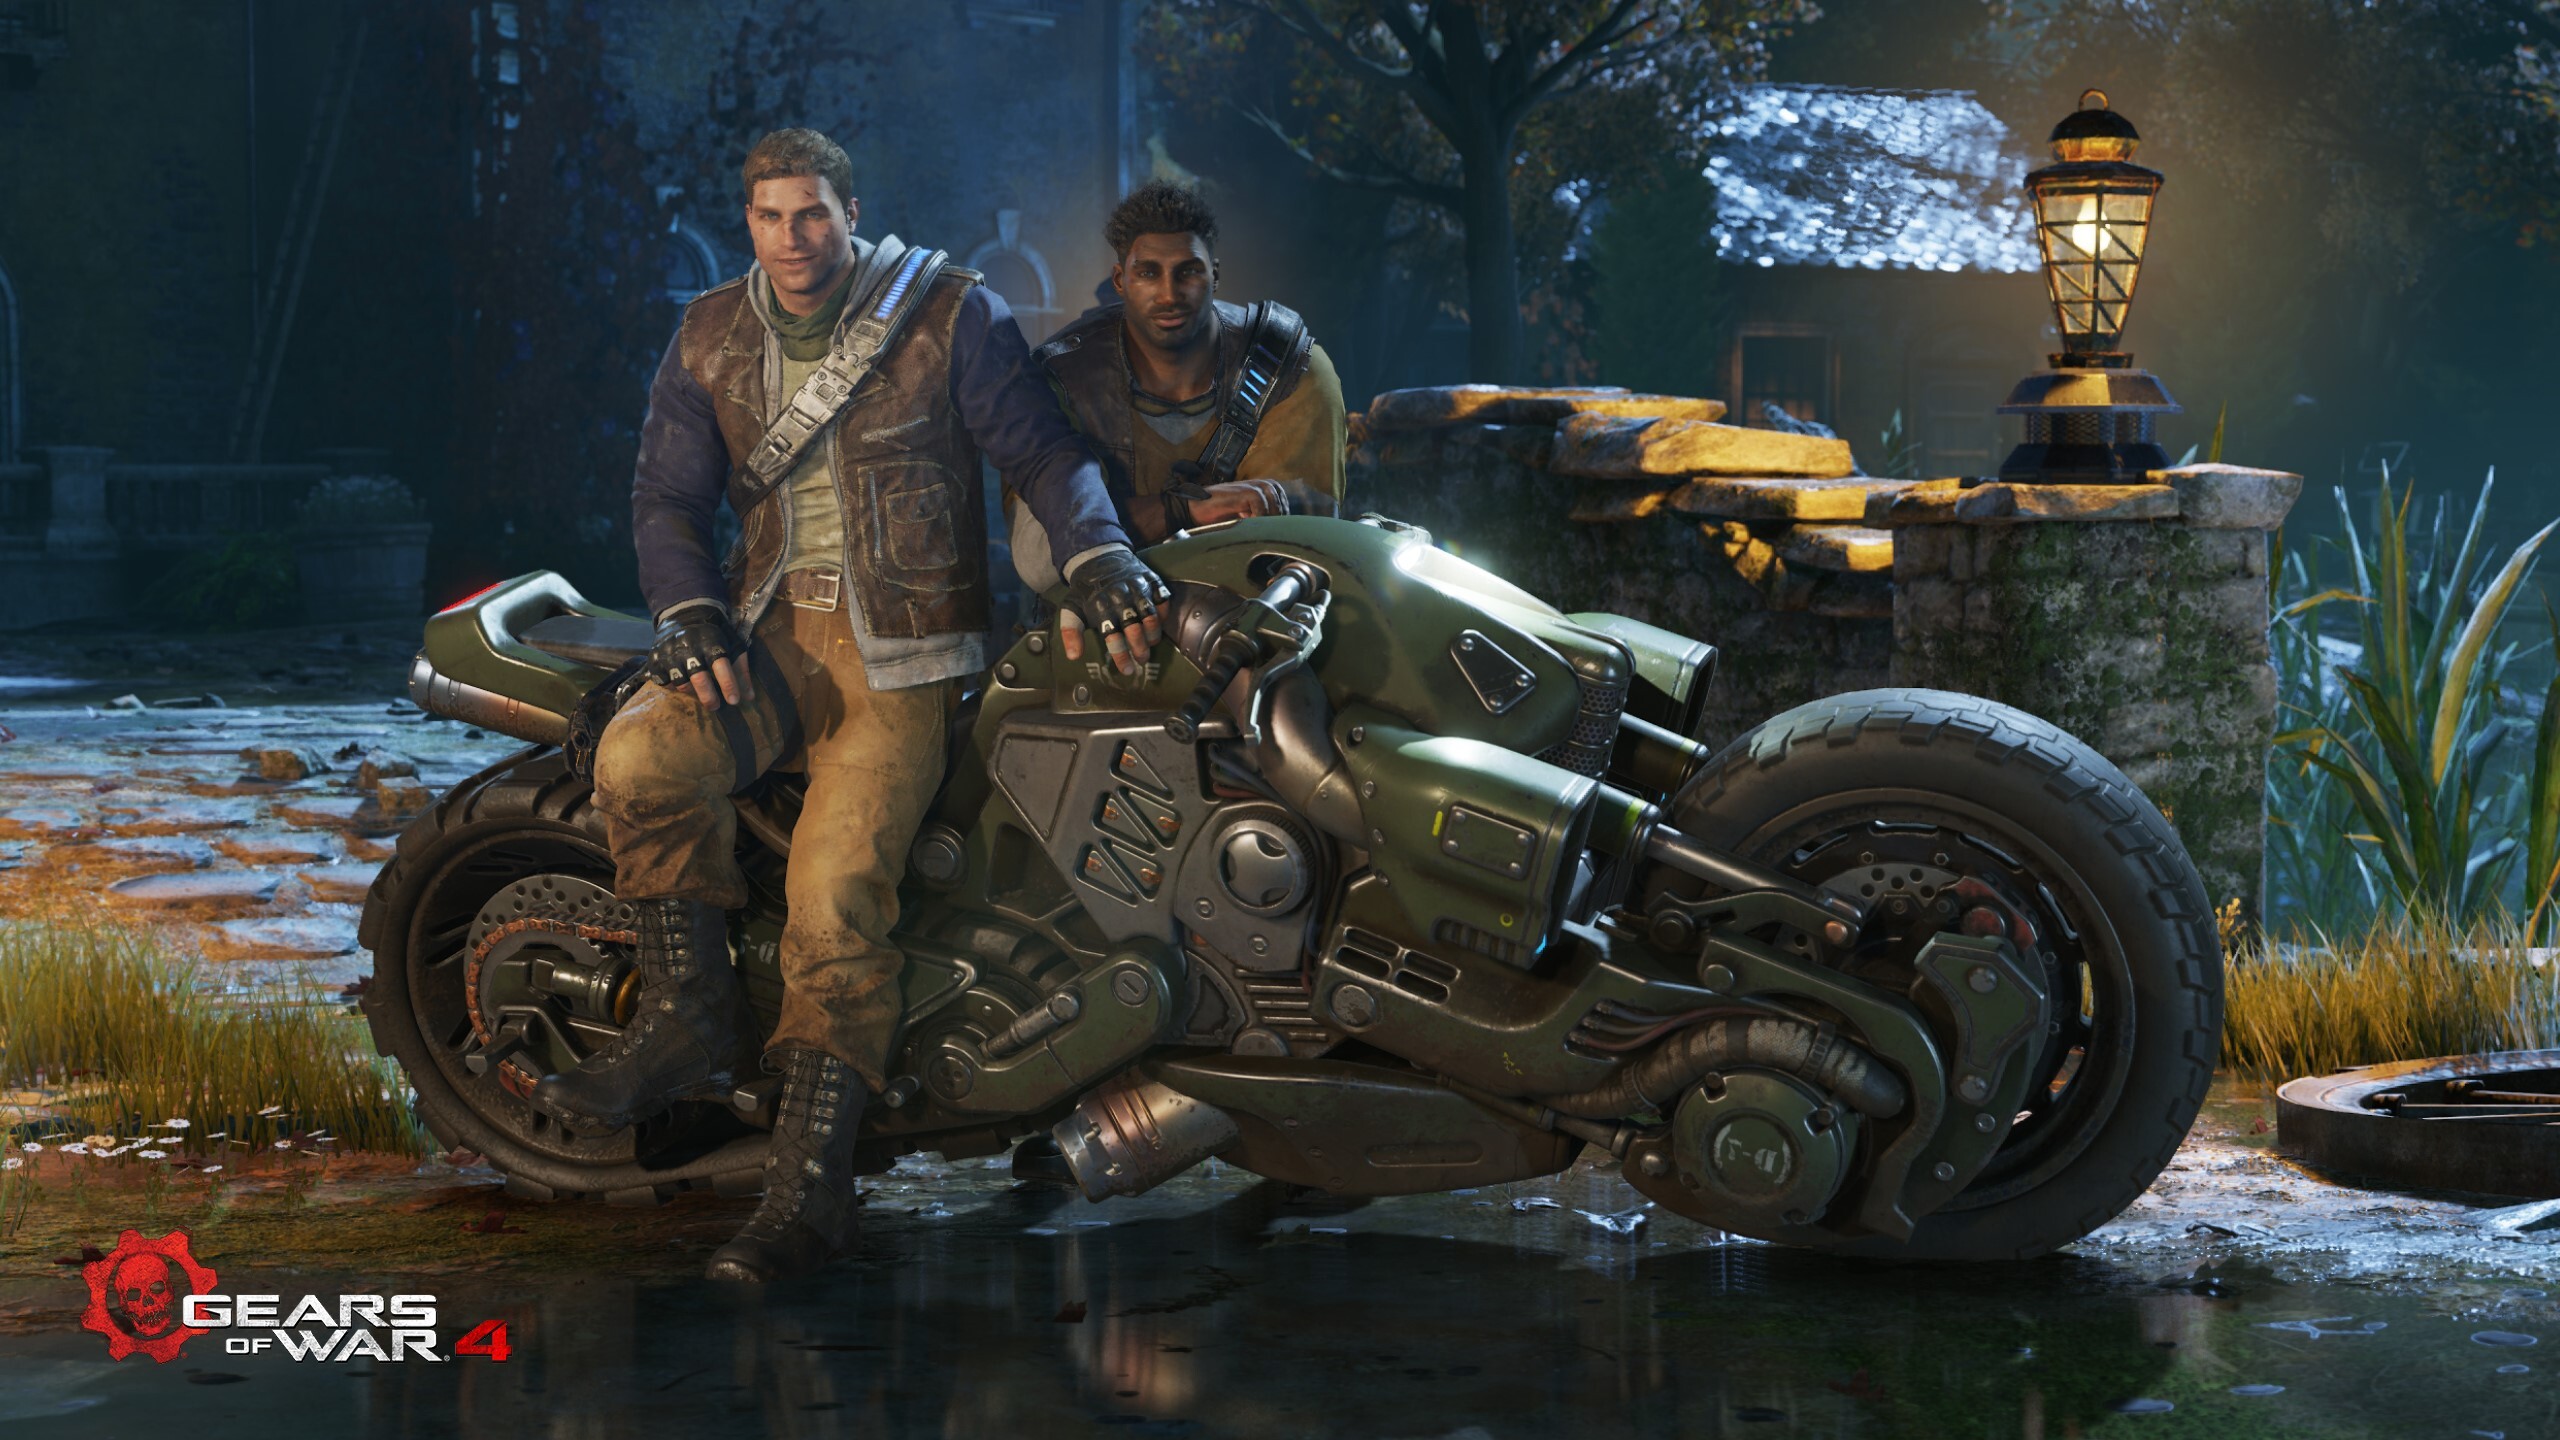 Gears of War 4, Xbox games, HD wallpapers, Thrilling gaming experience, 2560x1440 HD Desktop